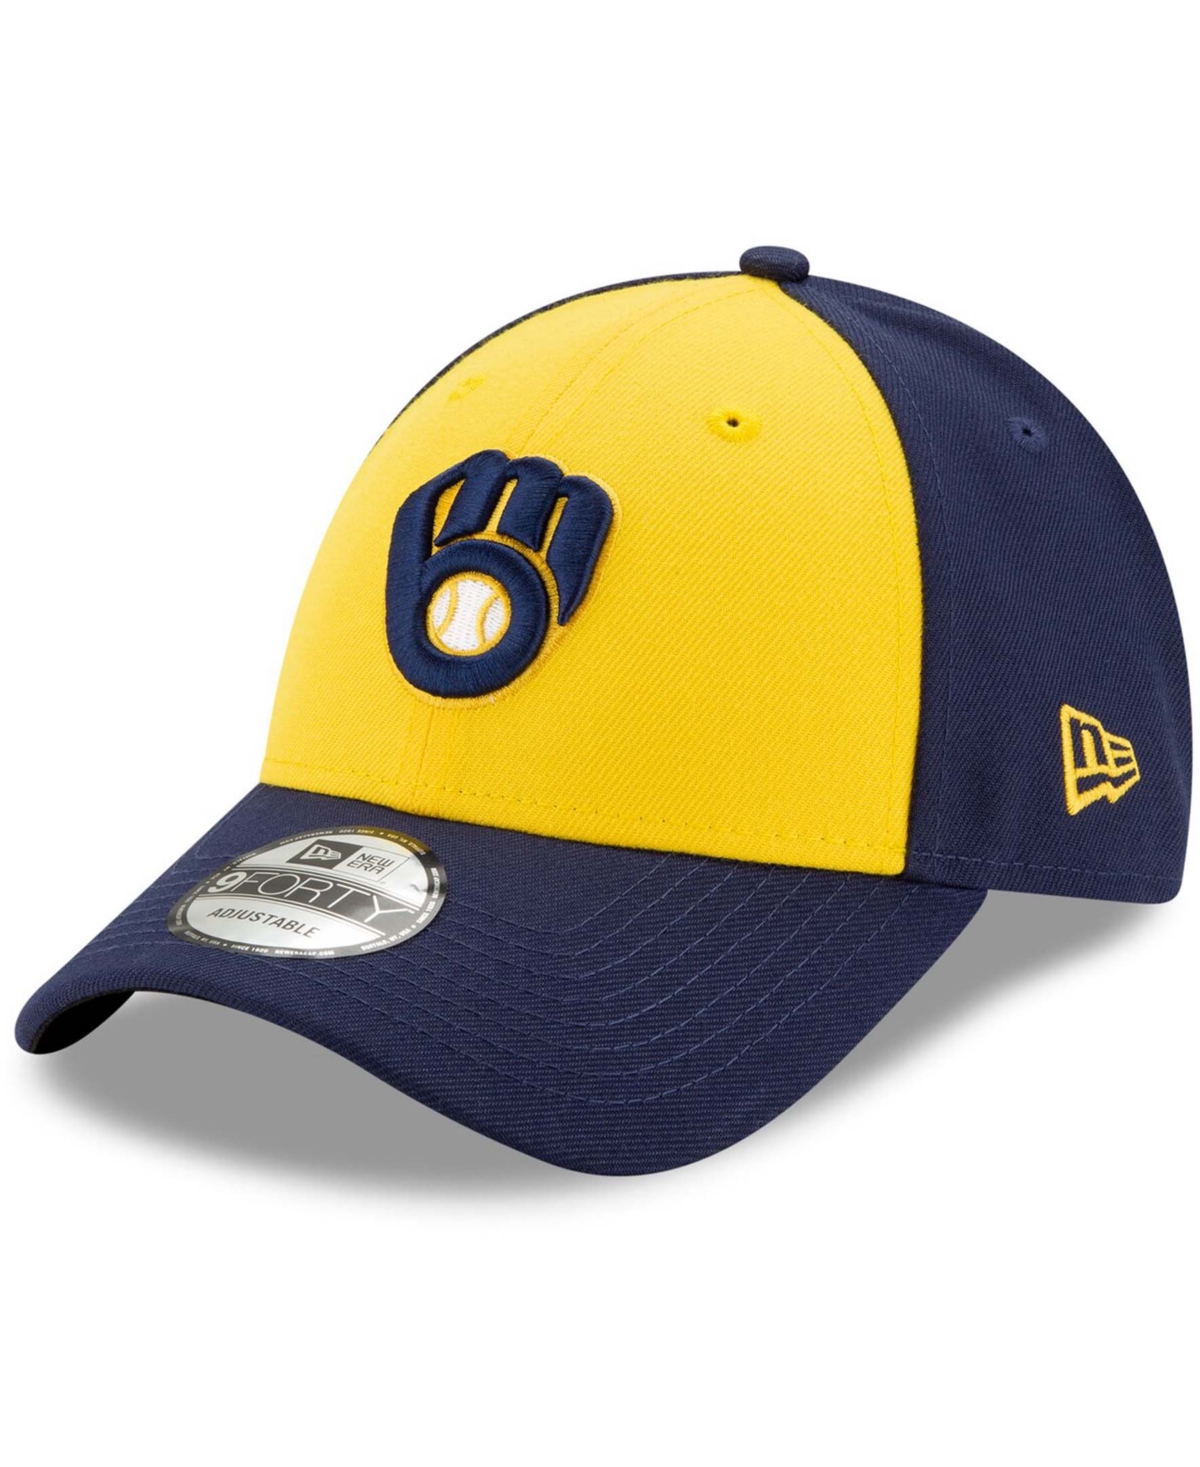 NEW ERA MEN'S GOLD, NAVY MILWAUKEE BREWERS ALTERNATE THE LEAGUE 9FORTY ADJUSTABLE HAT